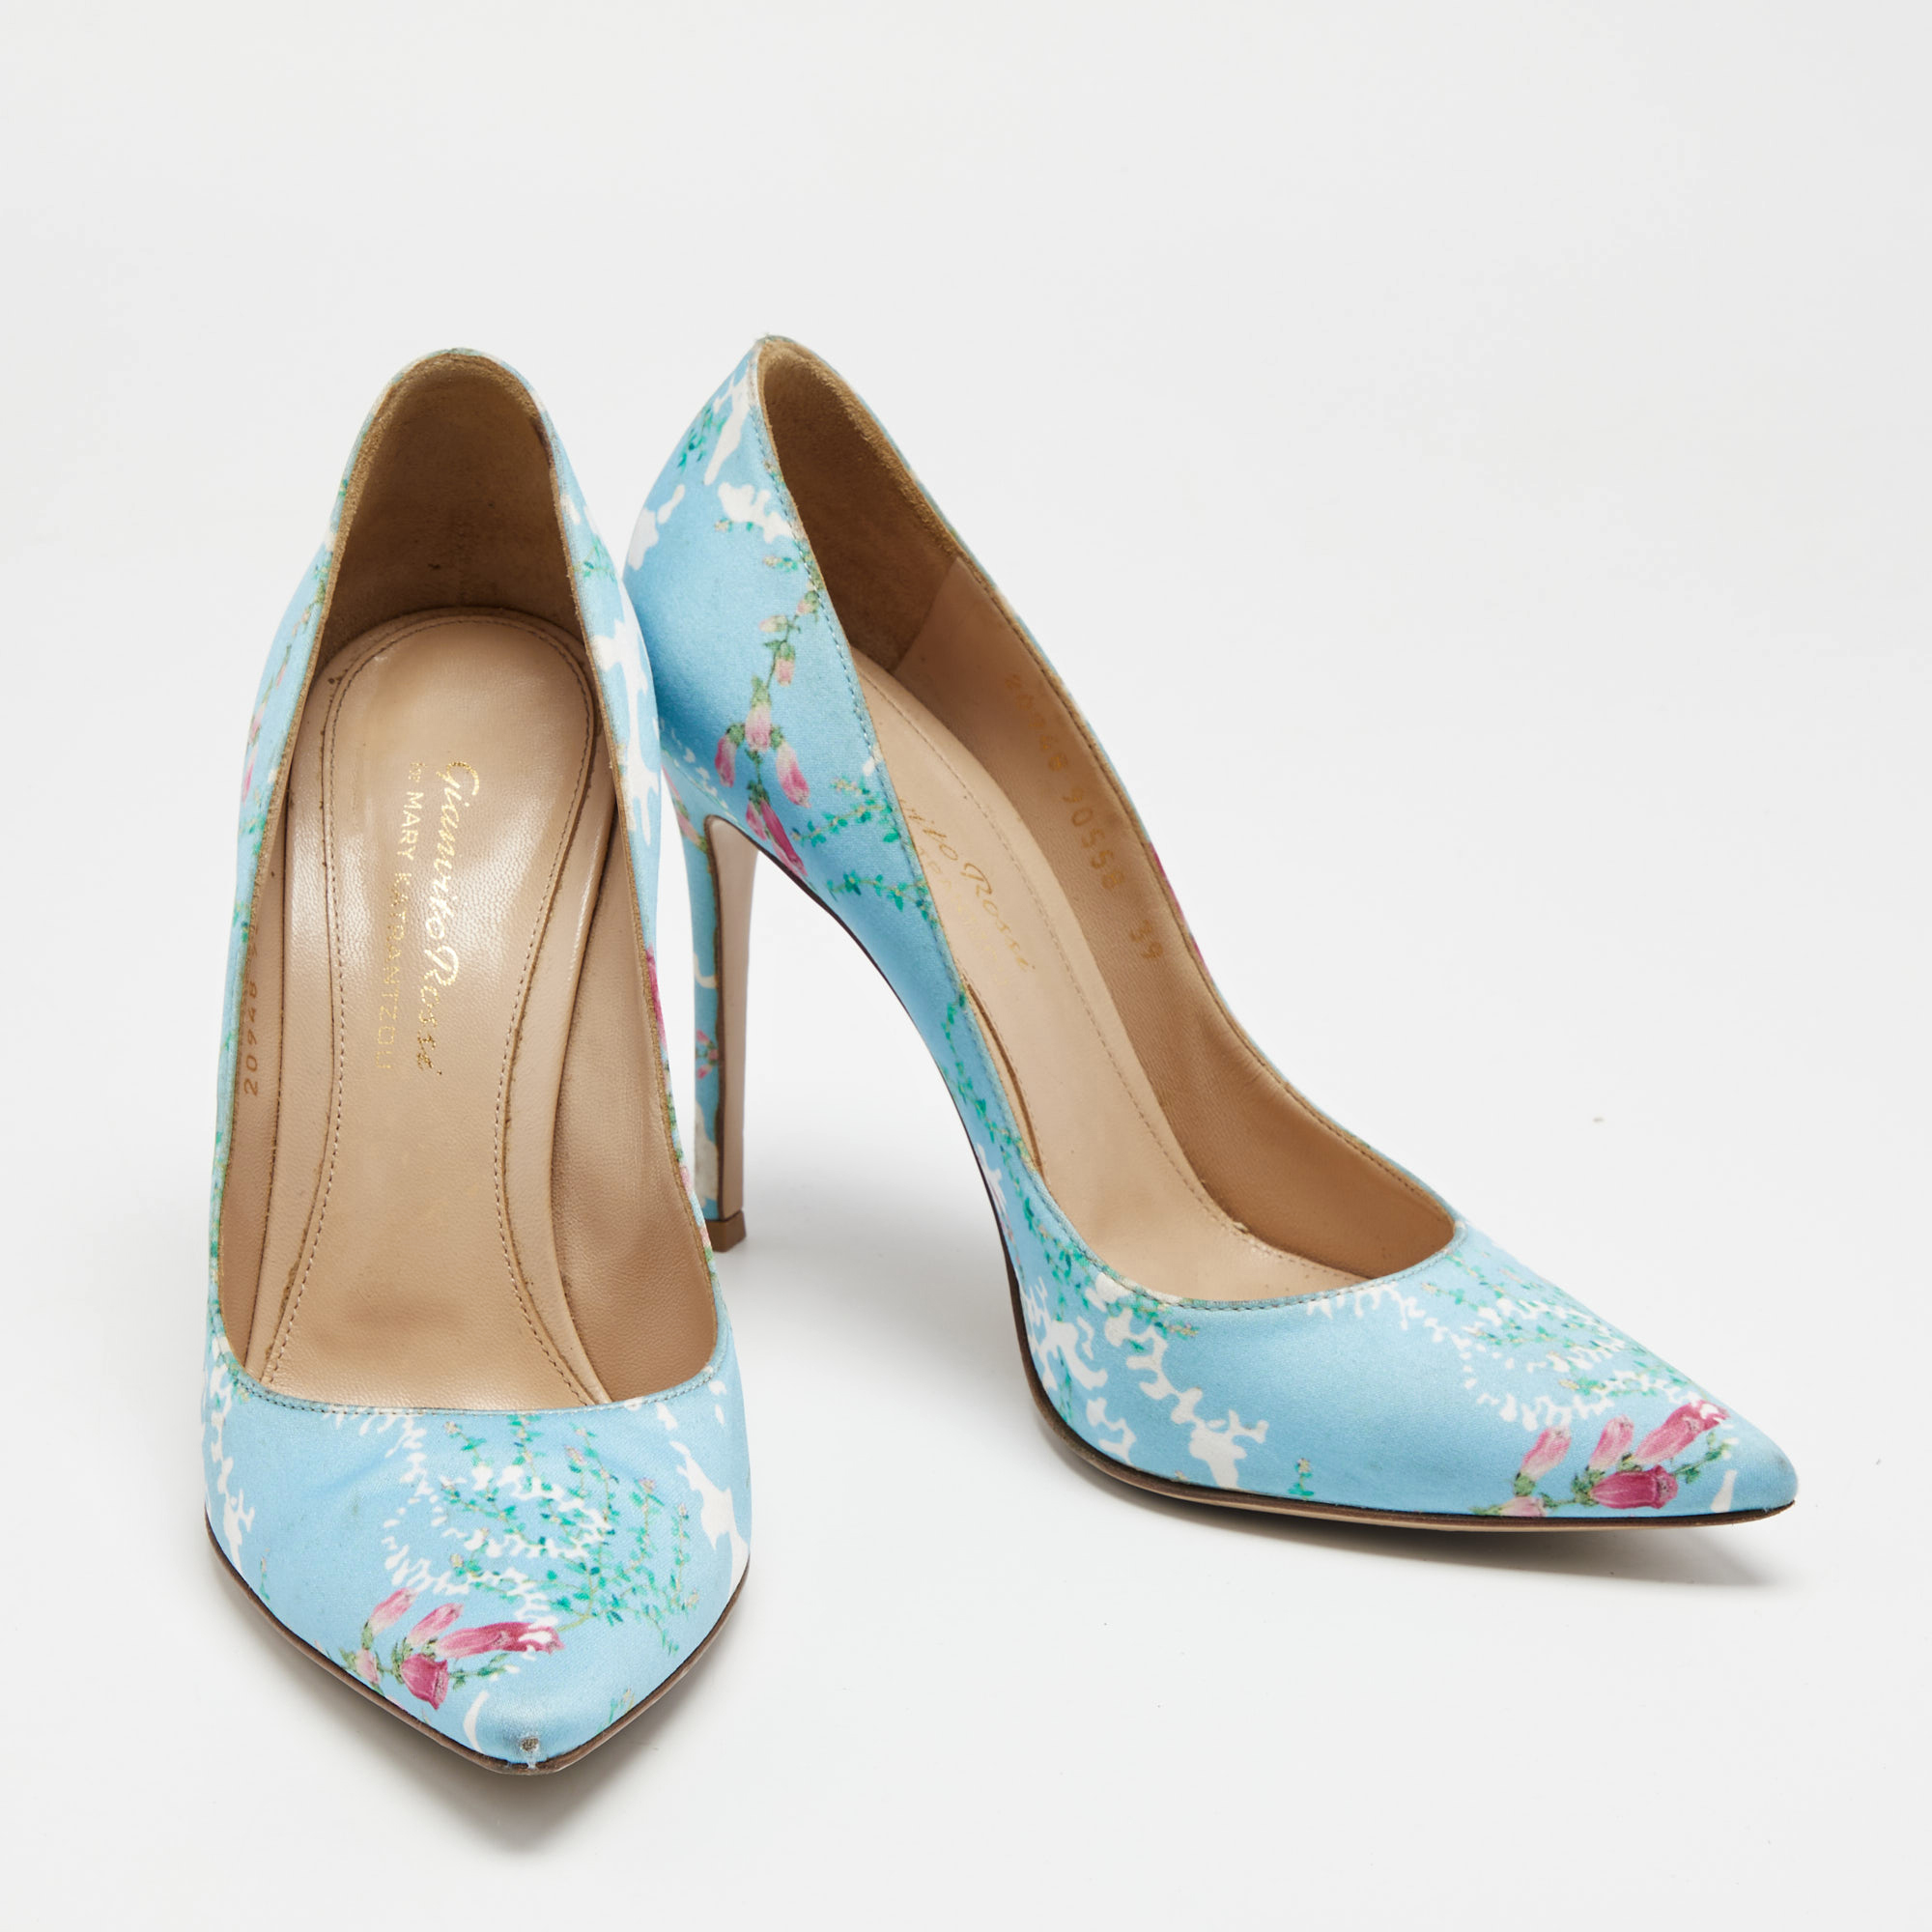 Gianvito Rossi Multicolor Floral Print Fabric Lisa Ponker Pumps Size 39